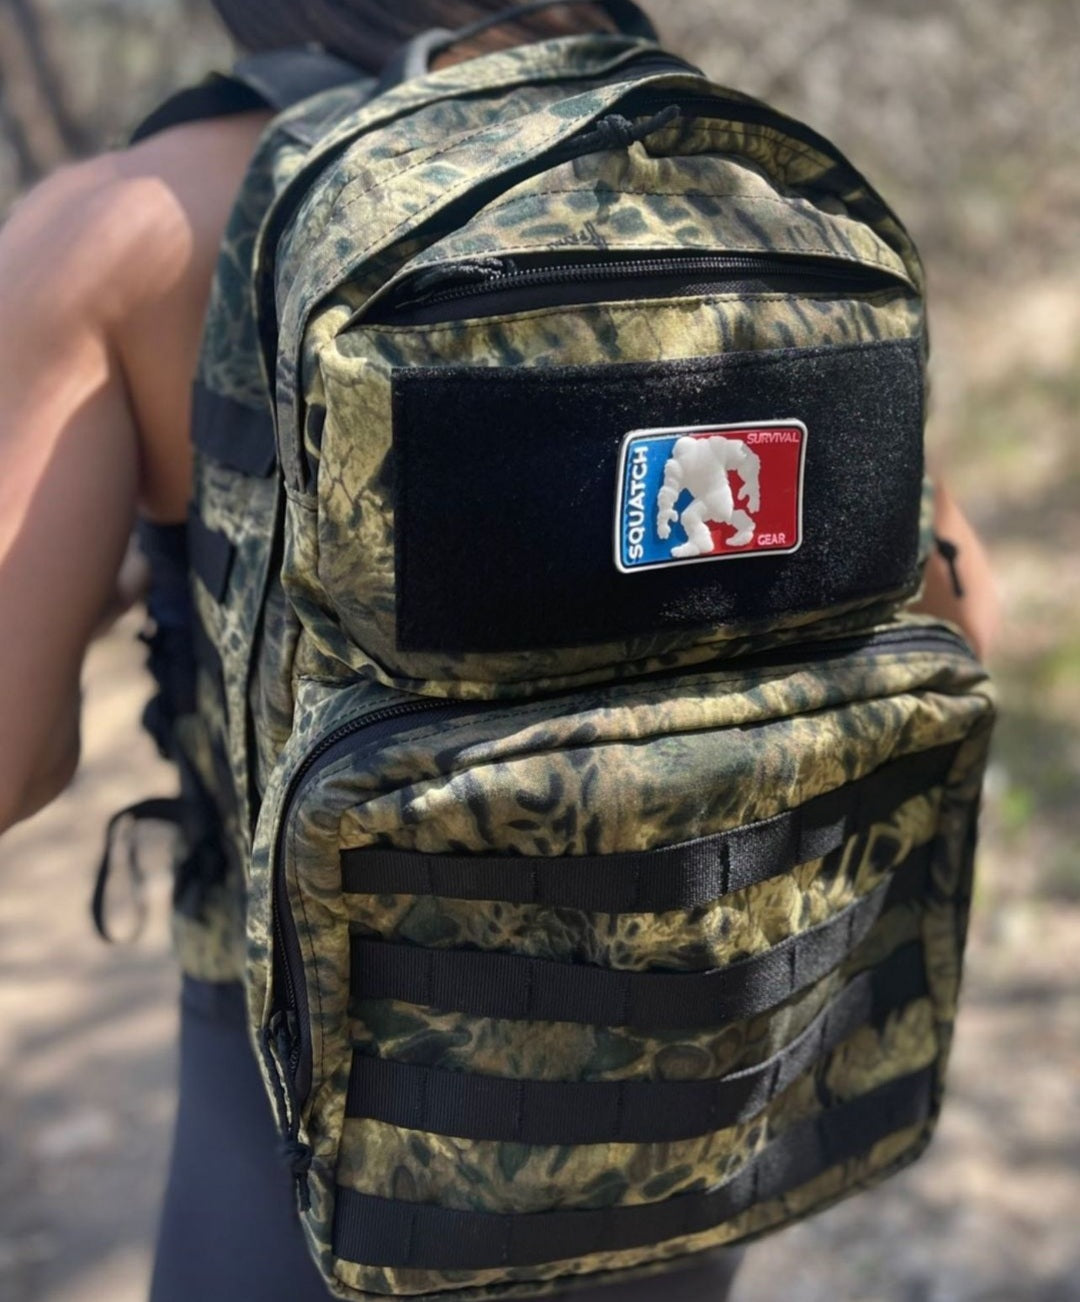 Small assault pack - day pack - backpack - hiking pack - tactical pack - prym1 camo - woodland camo - cute backpack - small backpack - public sq - soldiersystems daily backpack -  oudoor backpack - made in the usa backpack - usa backpack